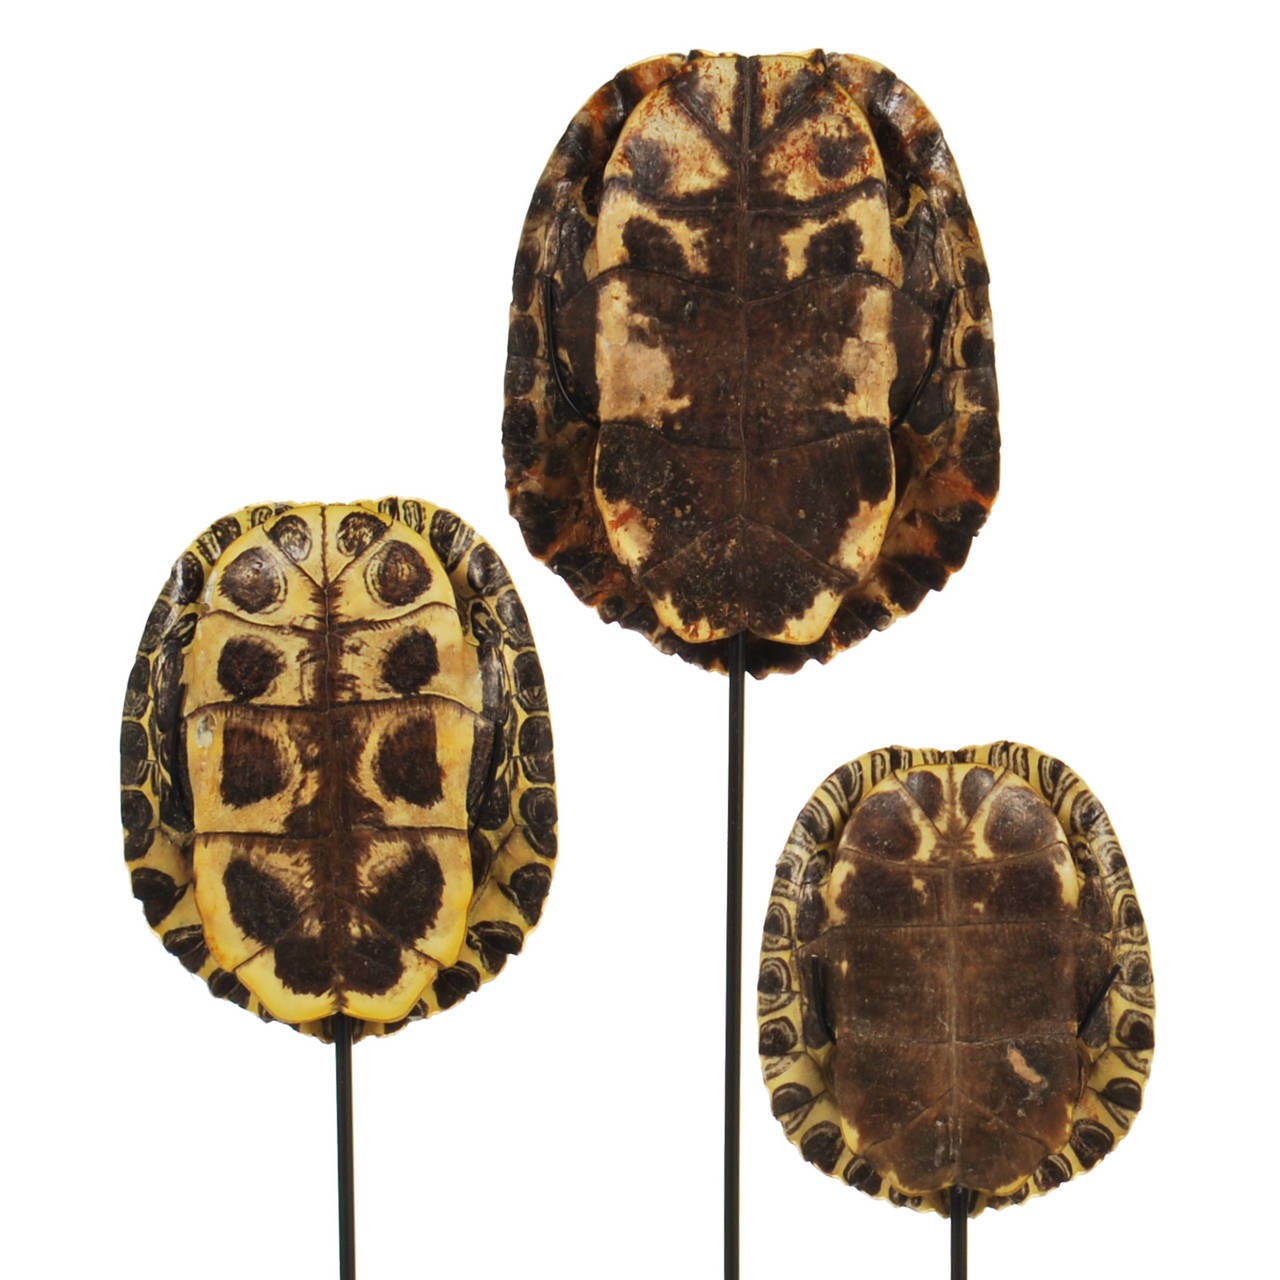 Adirondack Collection of Authentic Turtle Shells on Steel Display Stands